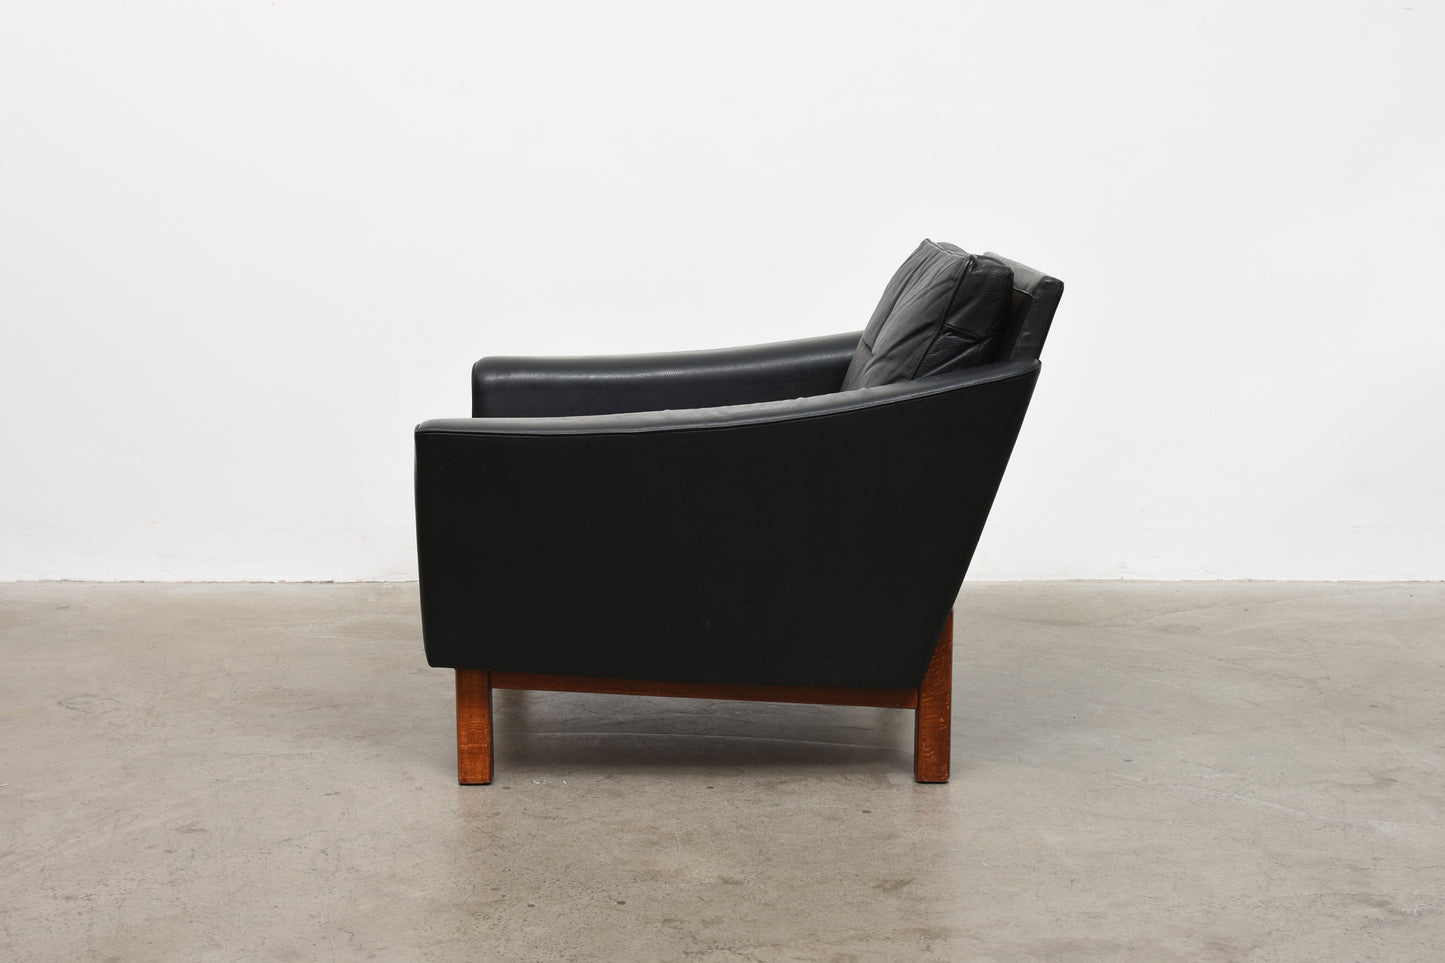 1960s Danish leather lounger